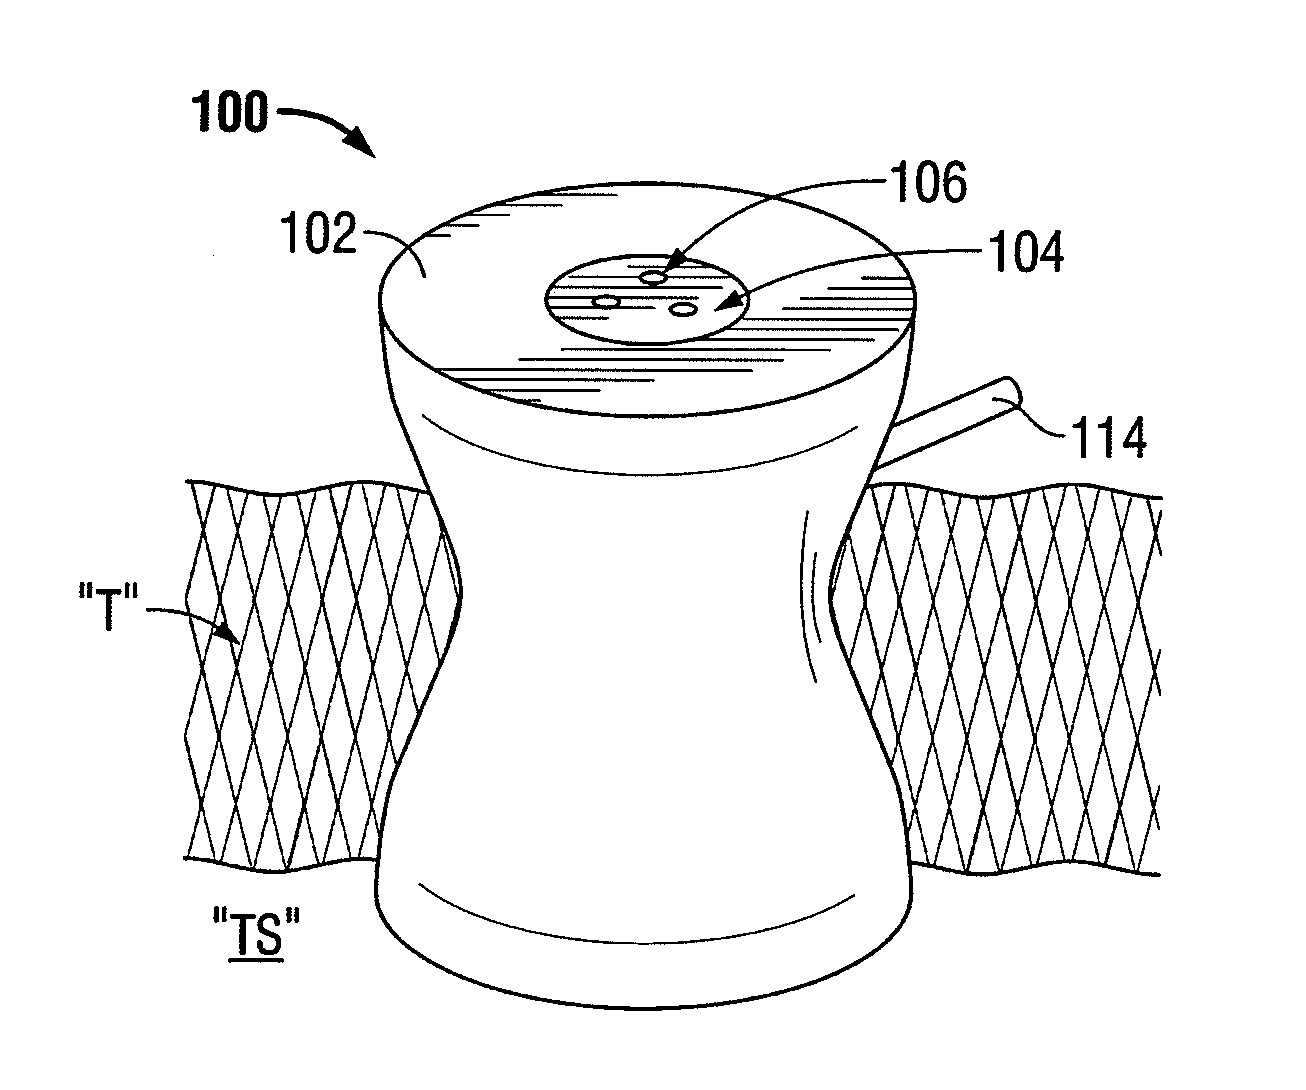 Single incision surgical portal apparatus including inner member